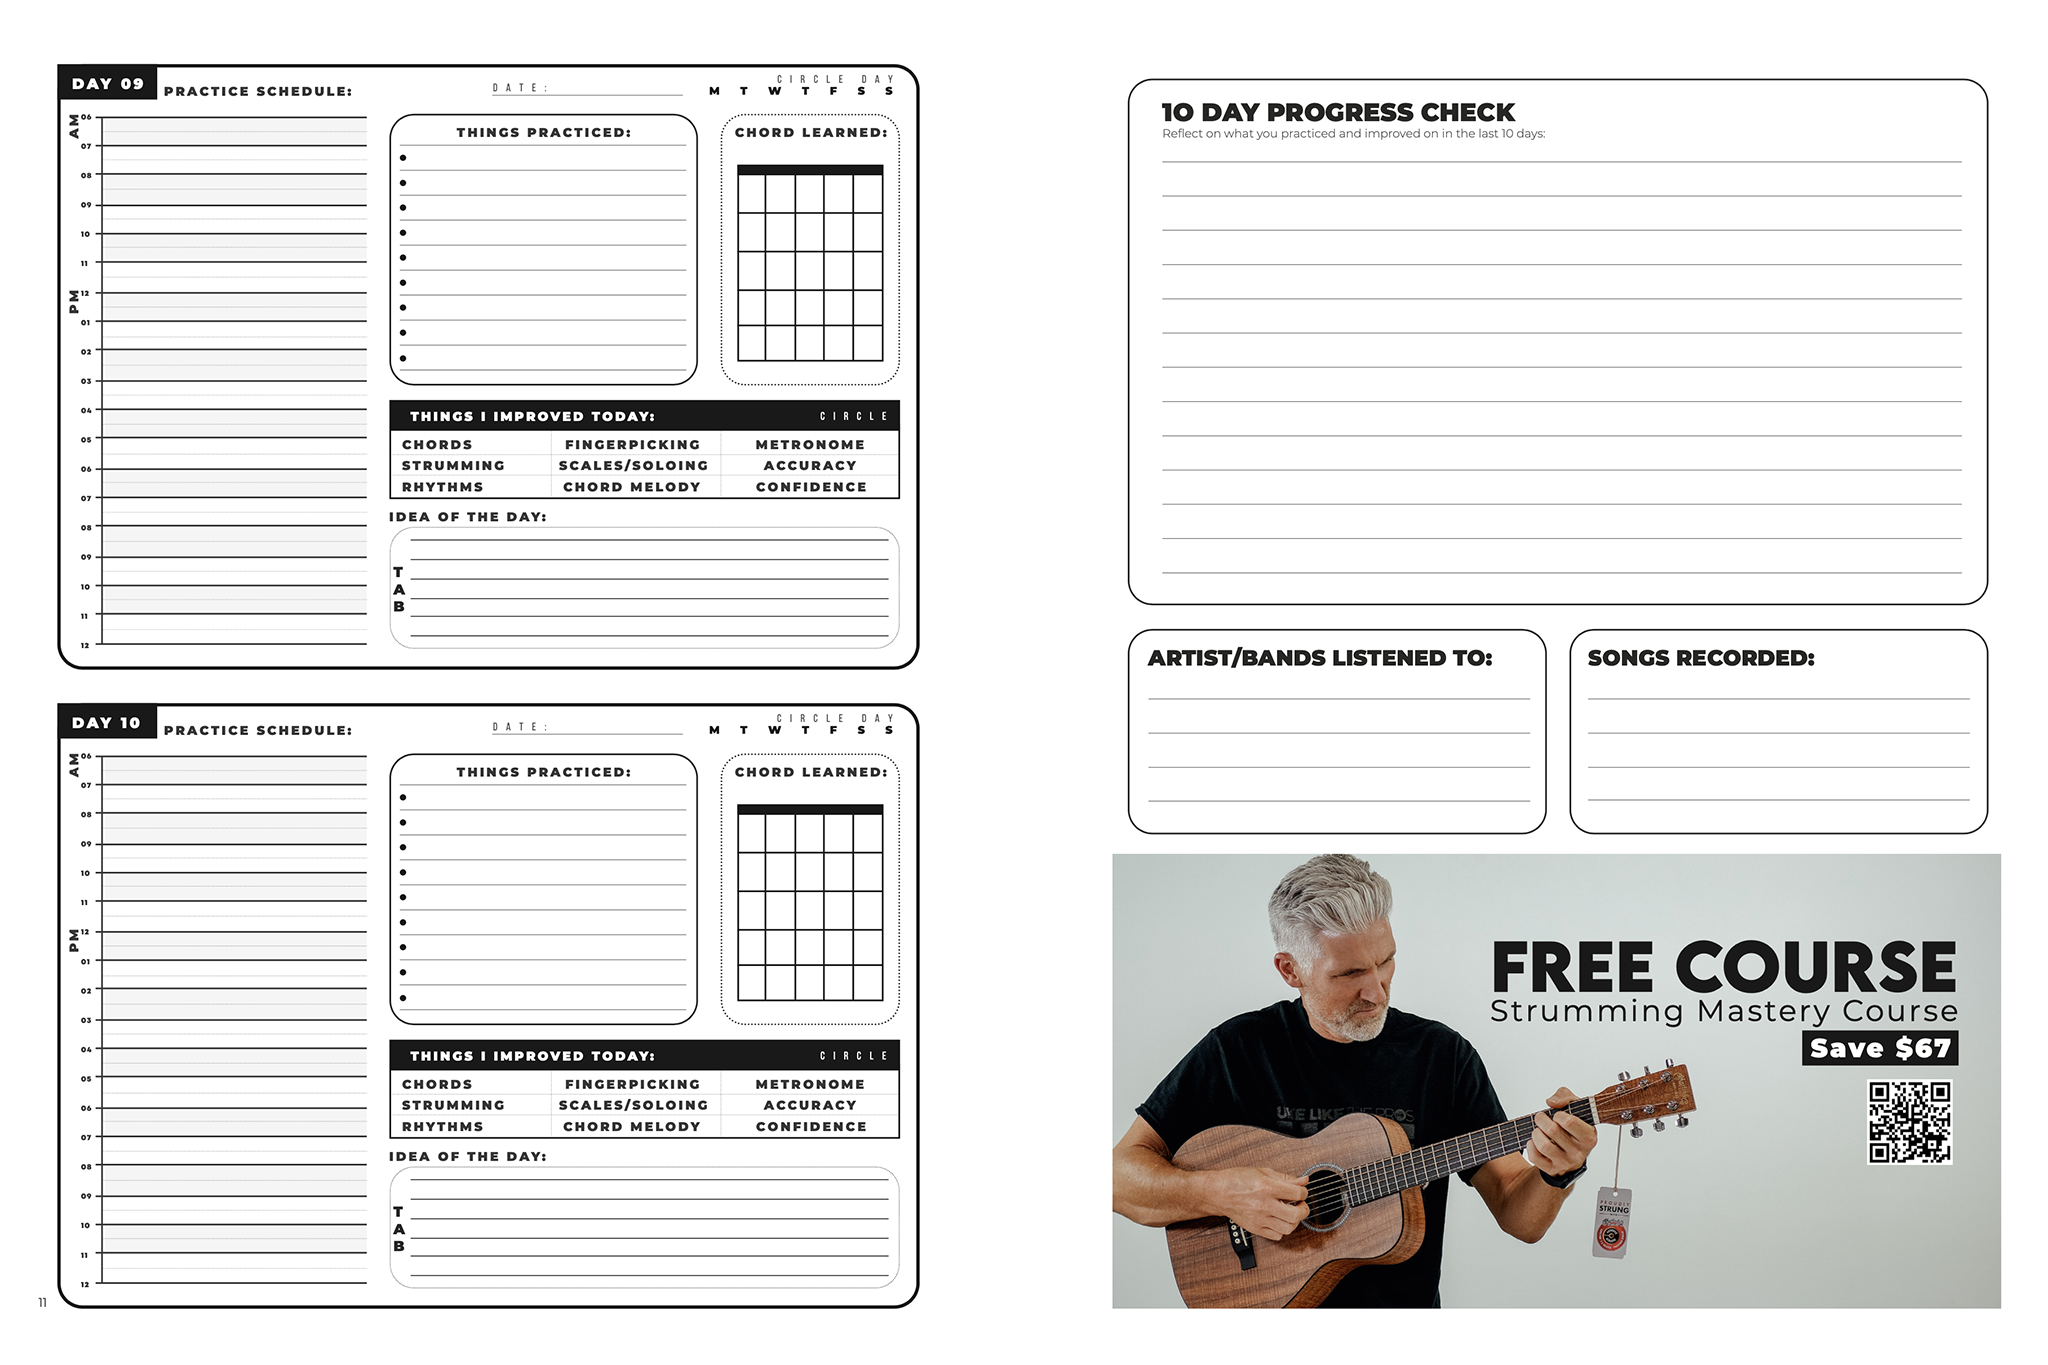 100 Day Guitar Music Practice Book